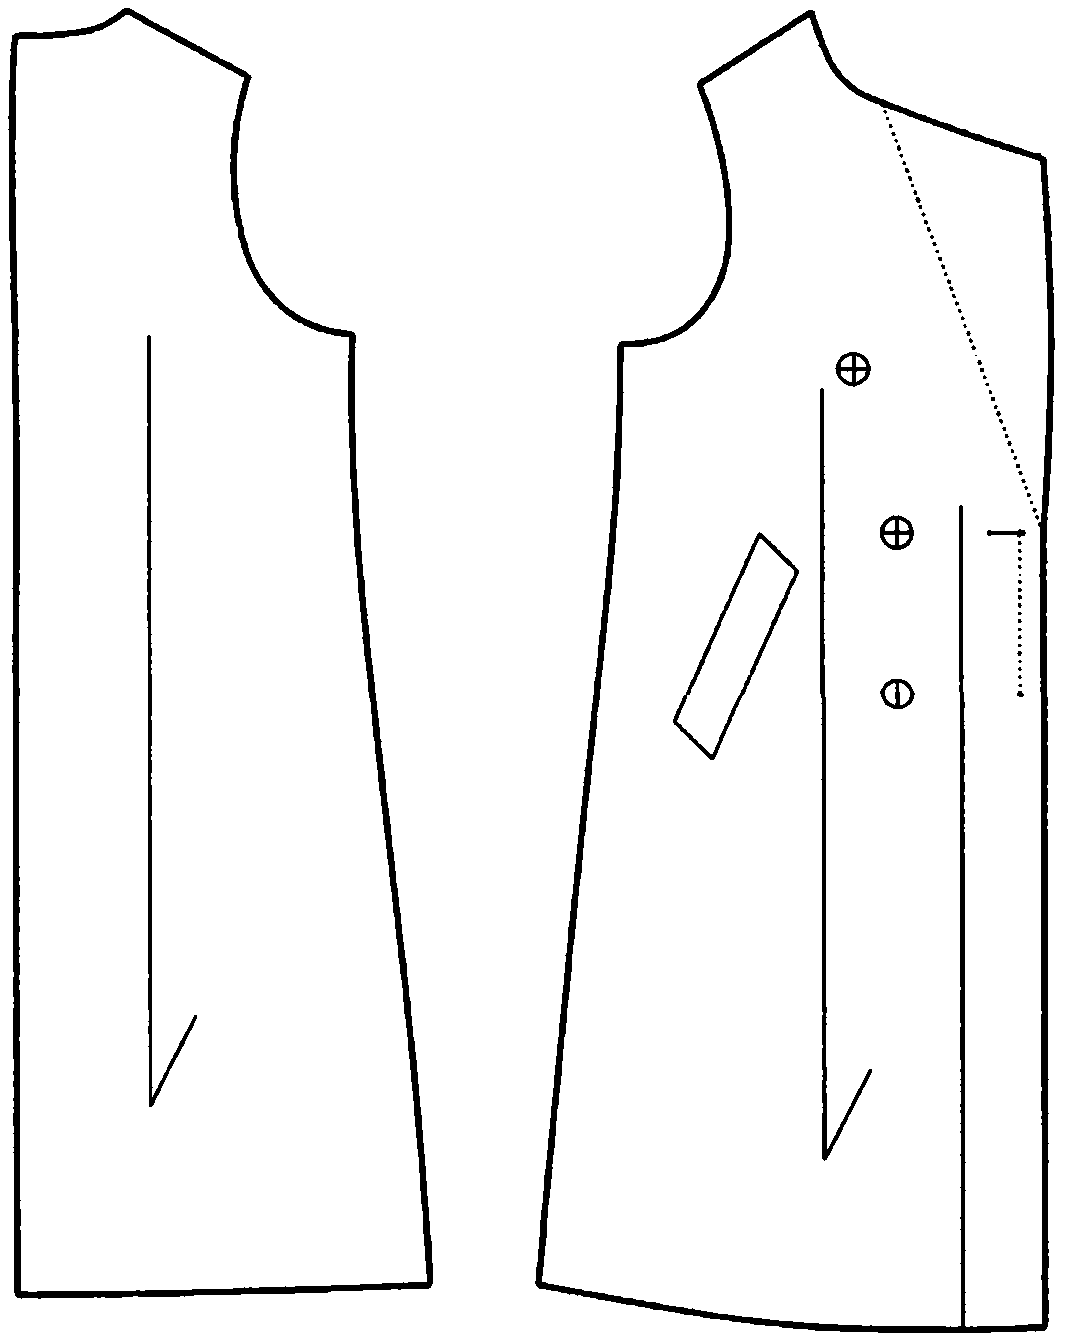 Pattern-making and sleeve-matching method for non-deviated rotator cuff clothing